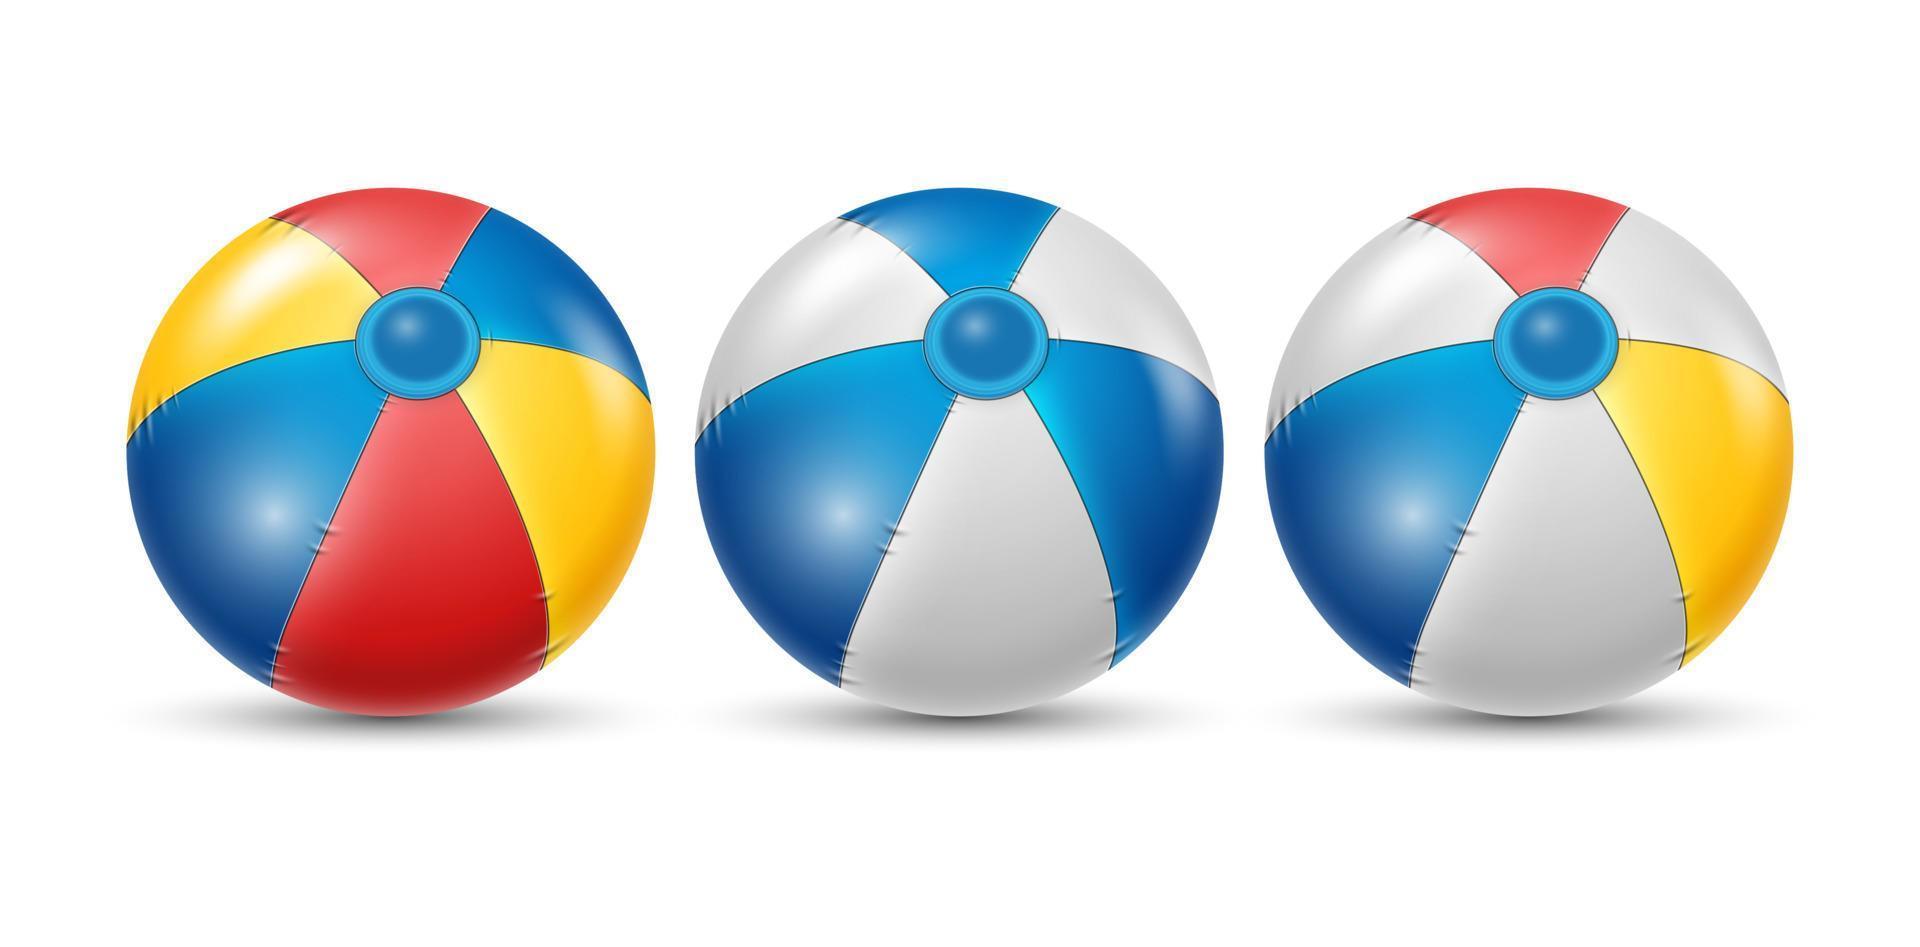 Colorful beach ball with different color set. white, yellow, and blue beach ball isolated on white background. Vector illustration